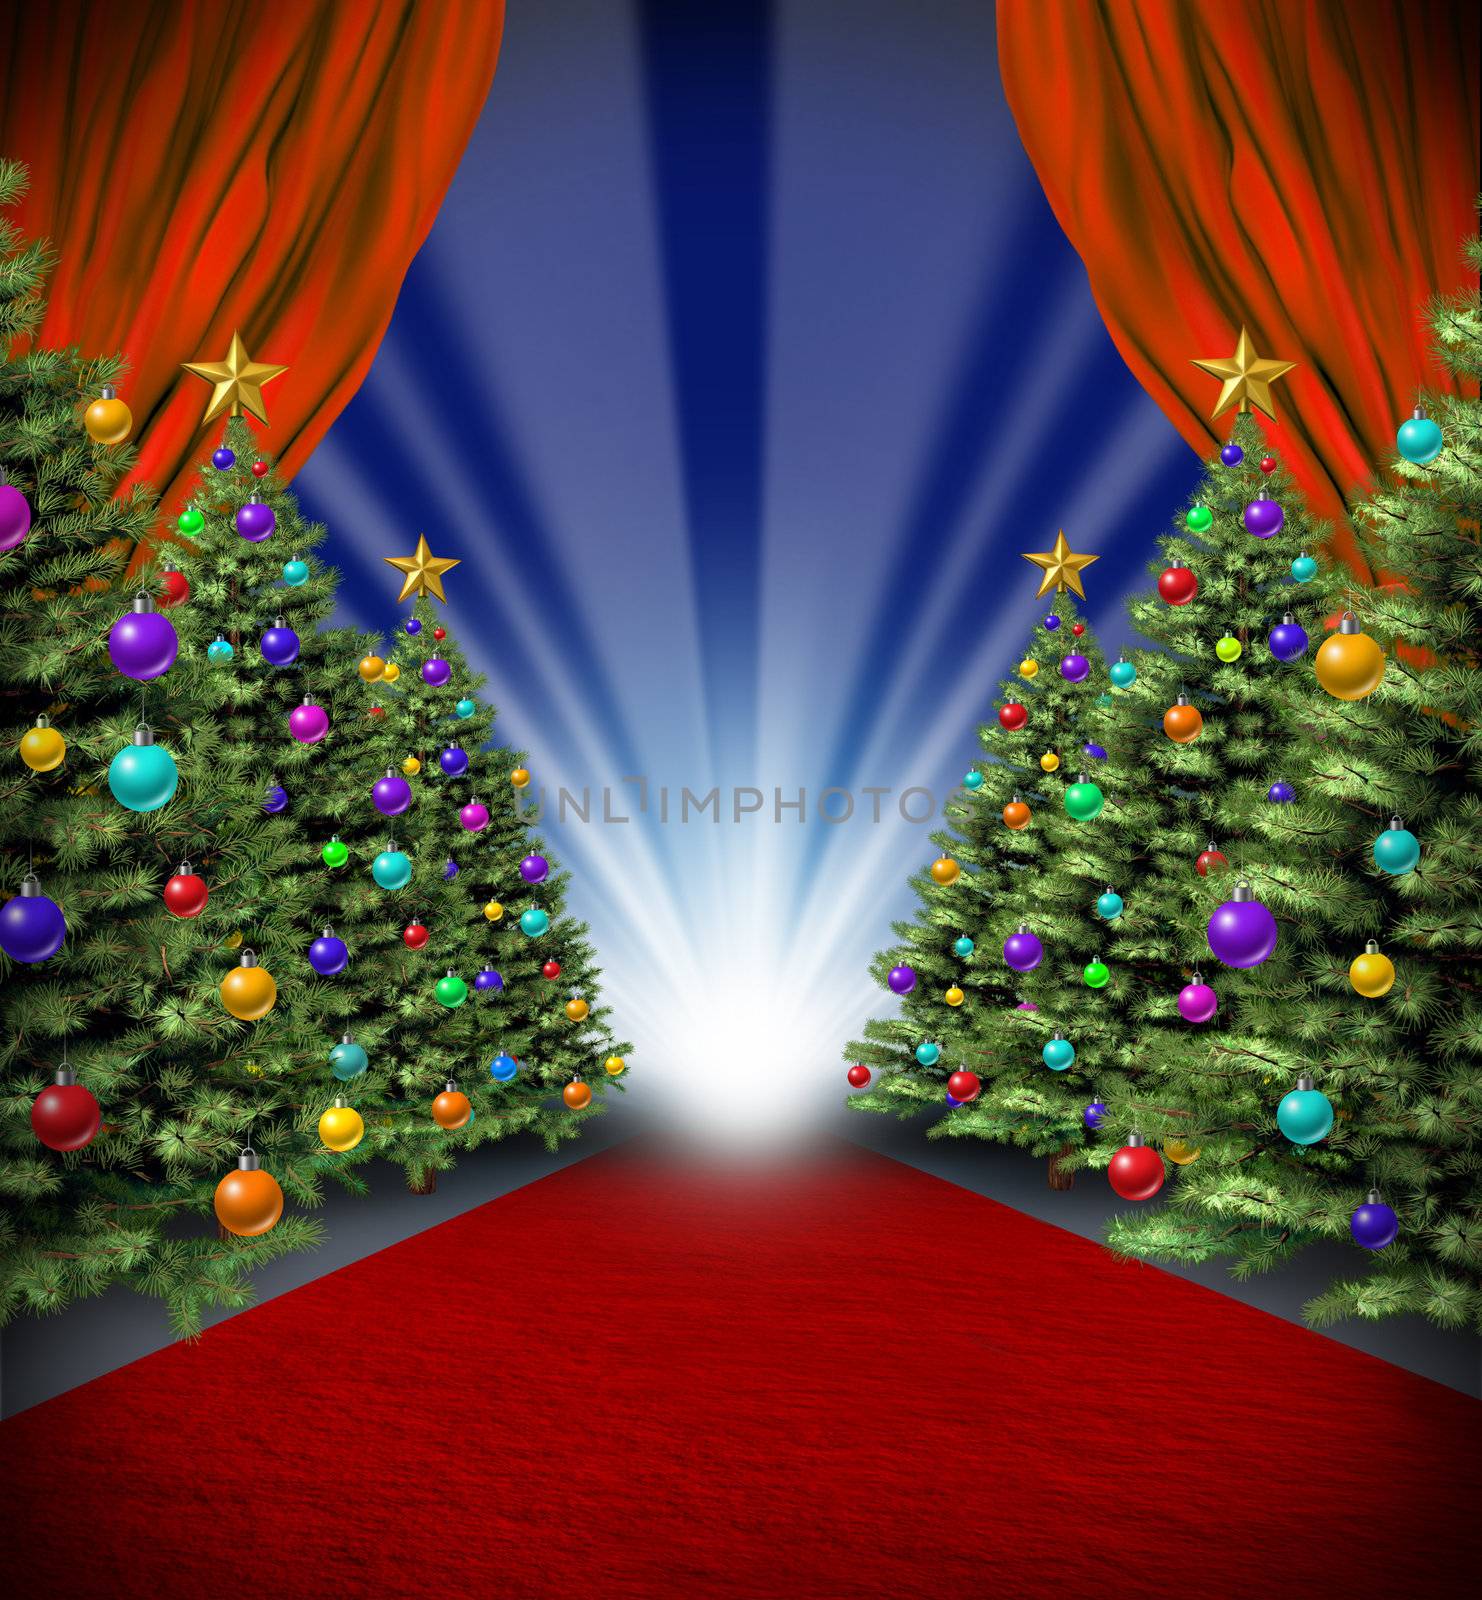 Red Carpet Holidays by brightsource